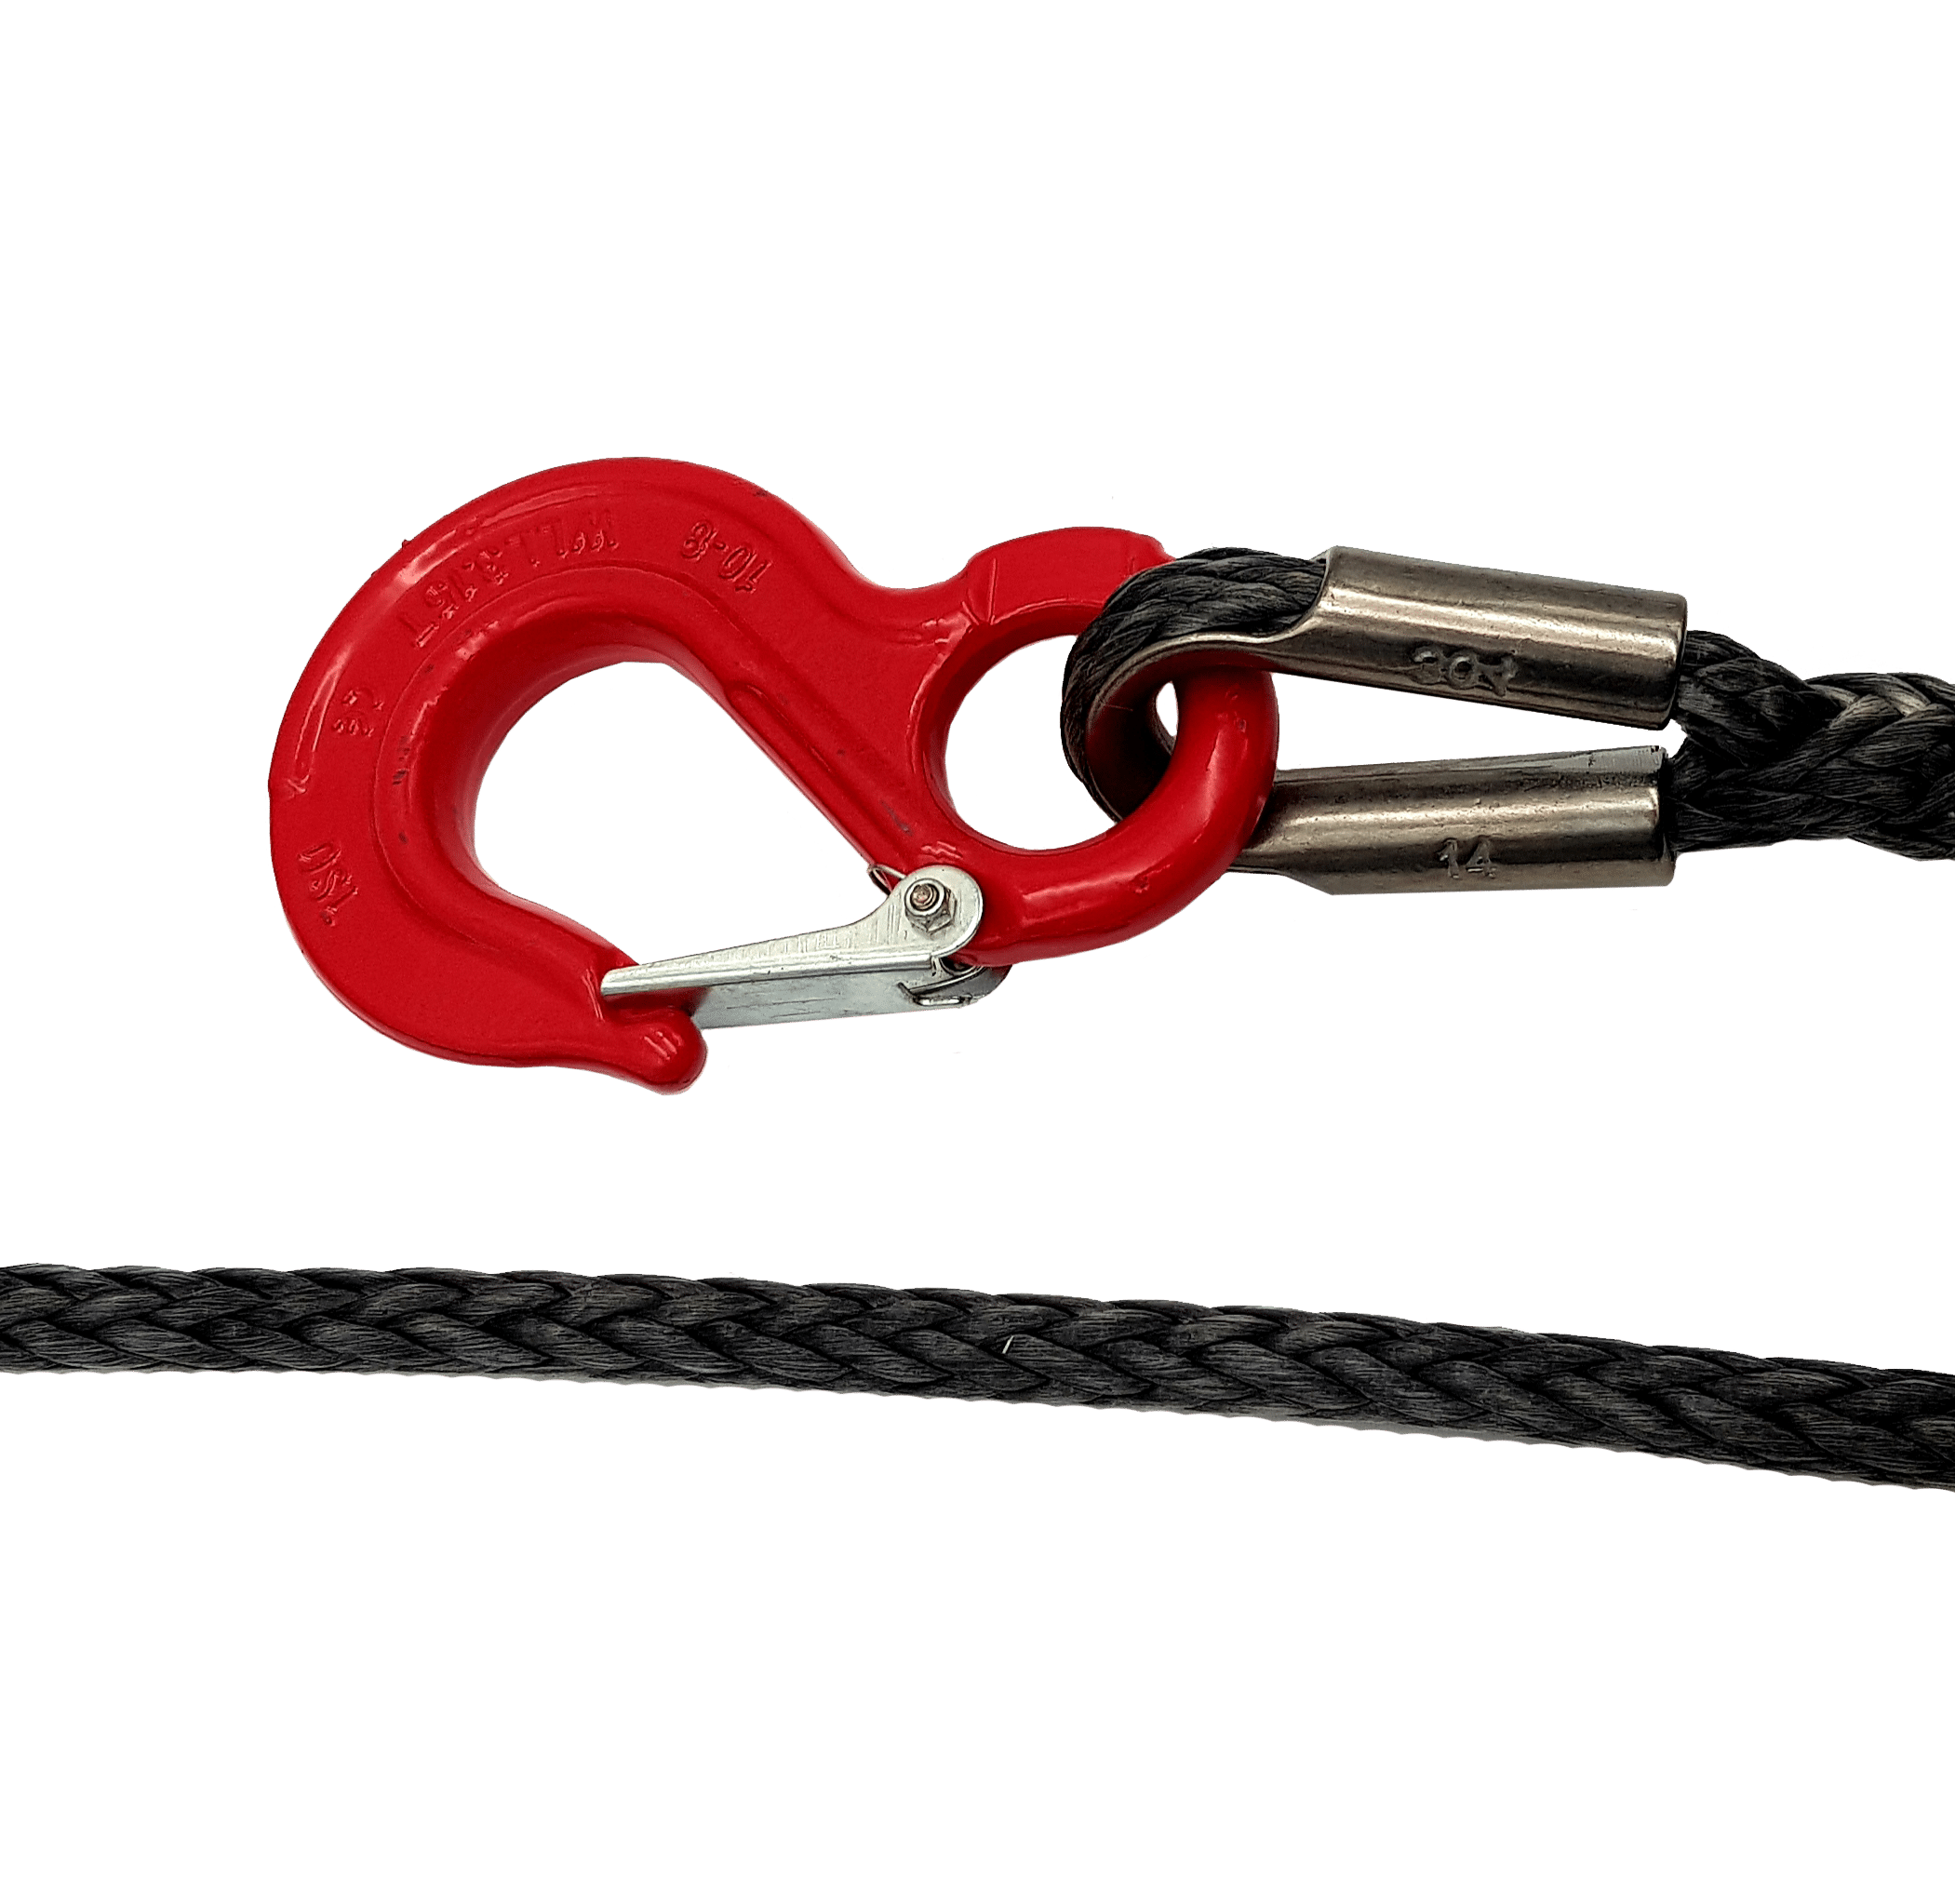 11mm x 55m RED Winches synthetic winch line with hook